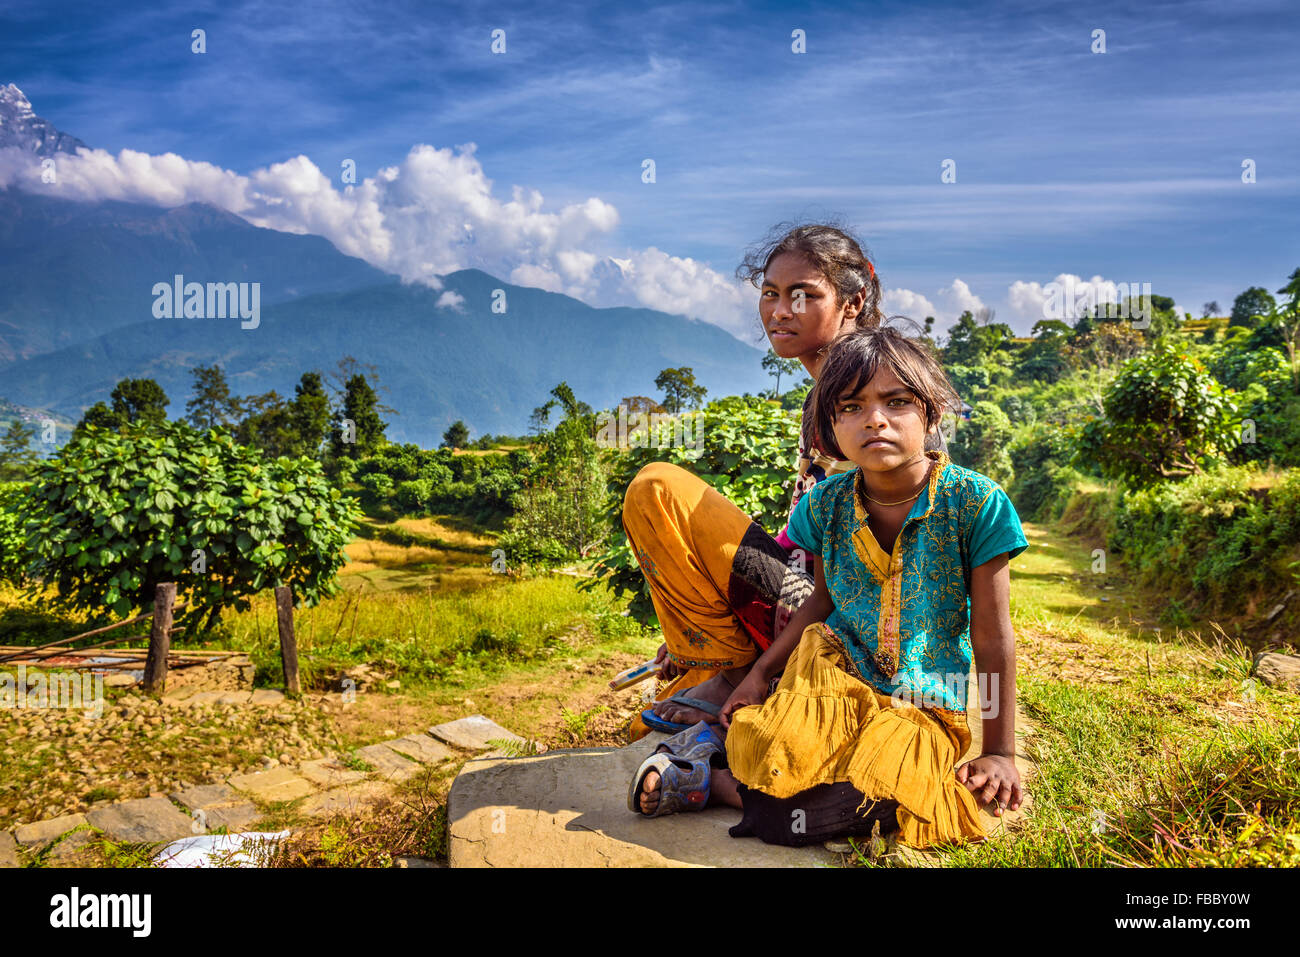 Nepalese children play in the Himalayas mountains near Pokhara Stock Photo